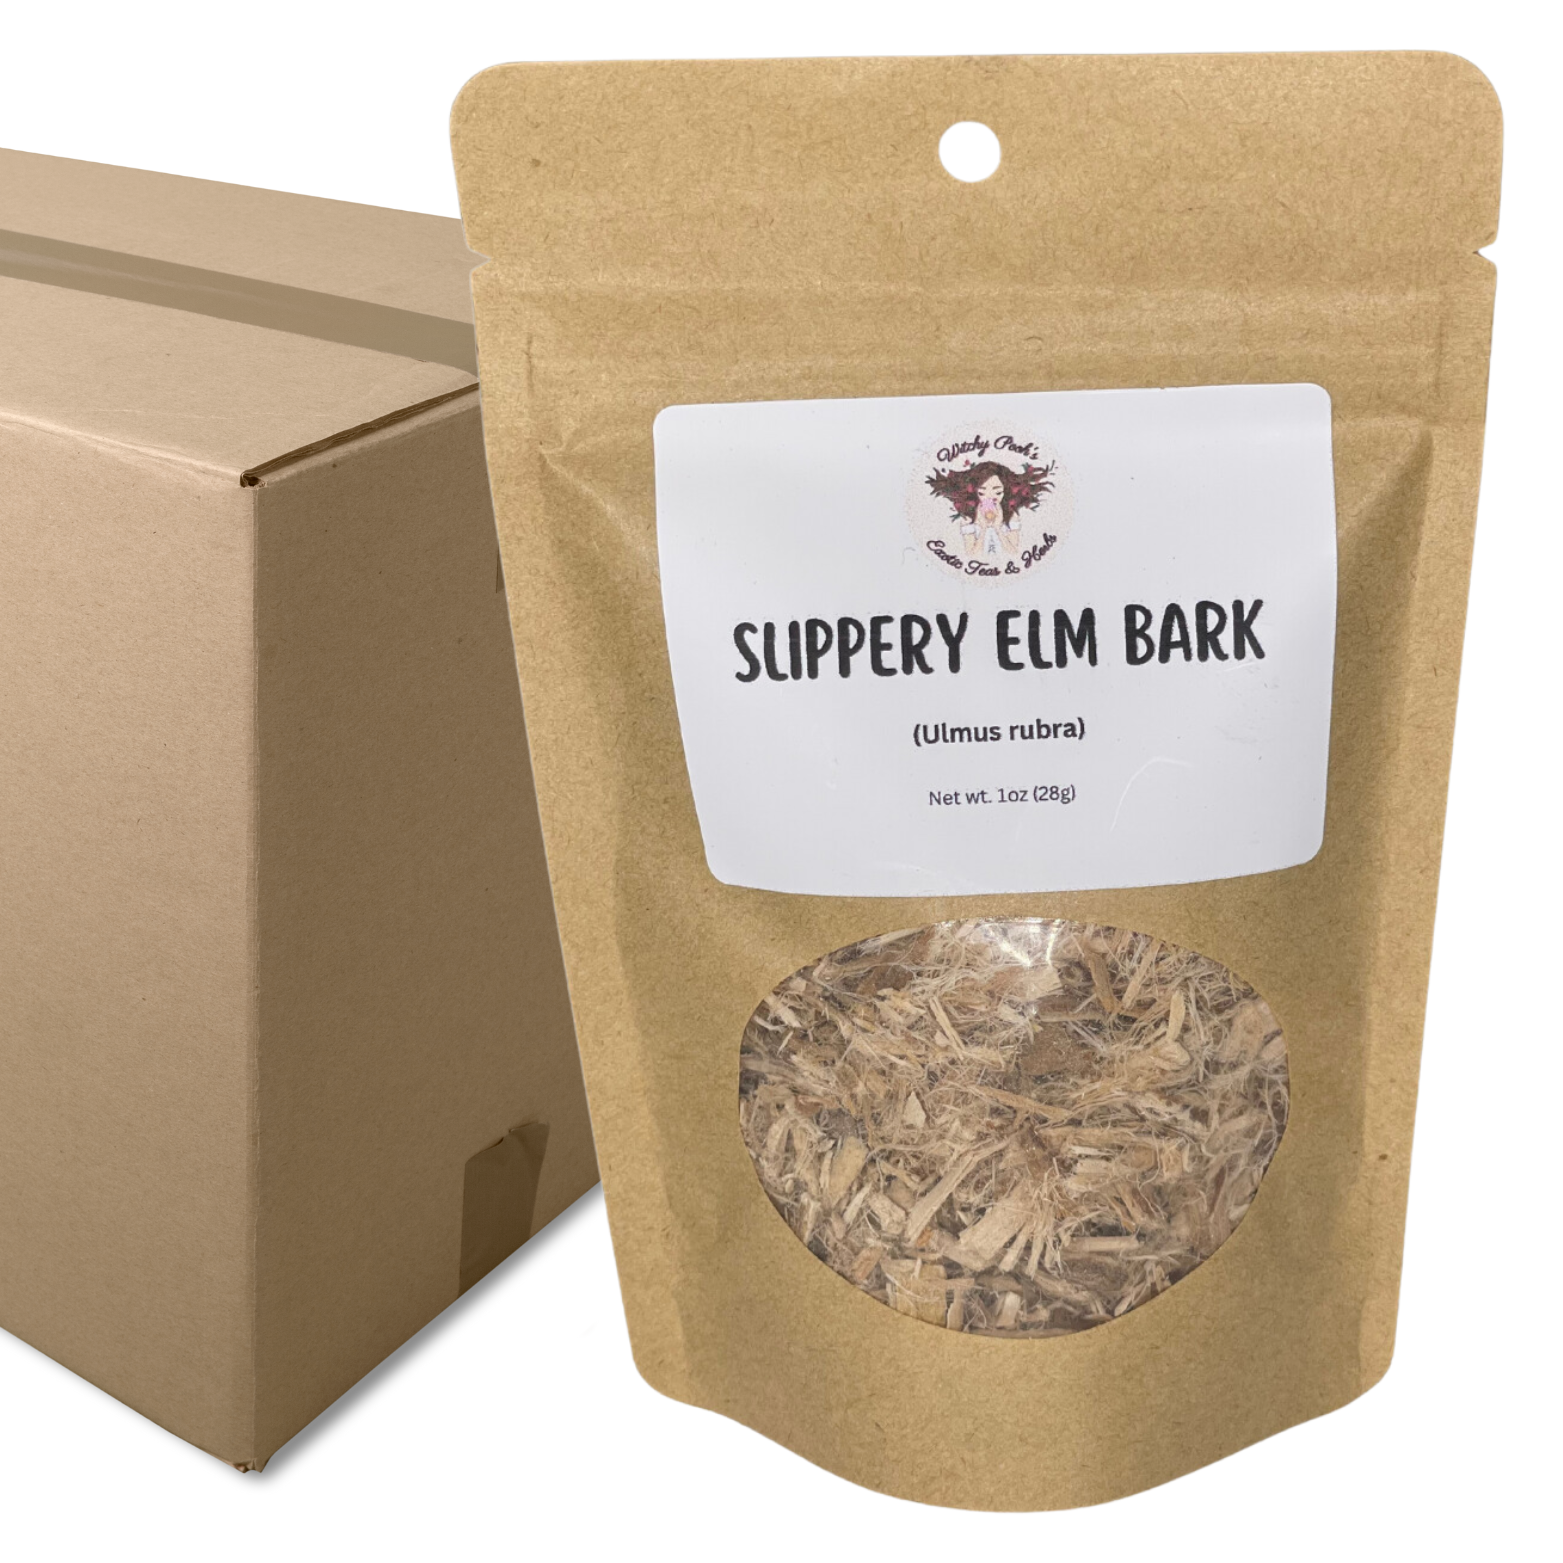 Witchy Pooh's Slippery Elm Bark For Ritual to Stop Rumor Spreading-12